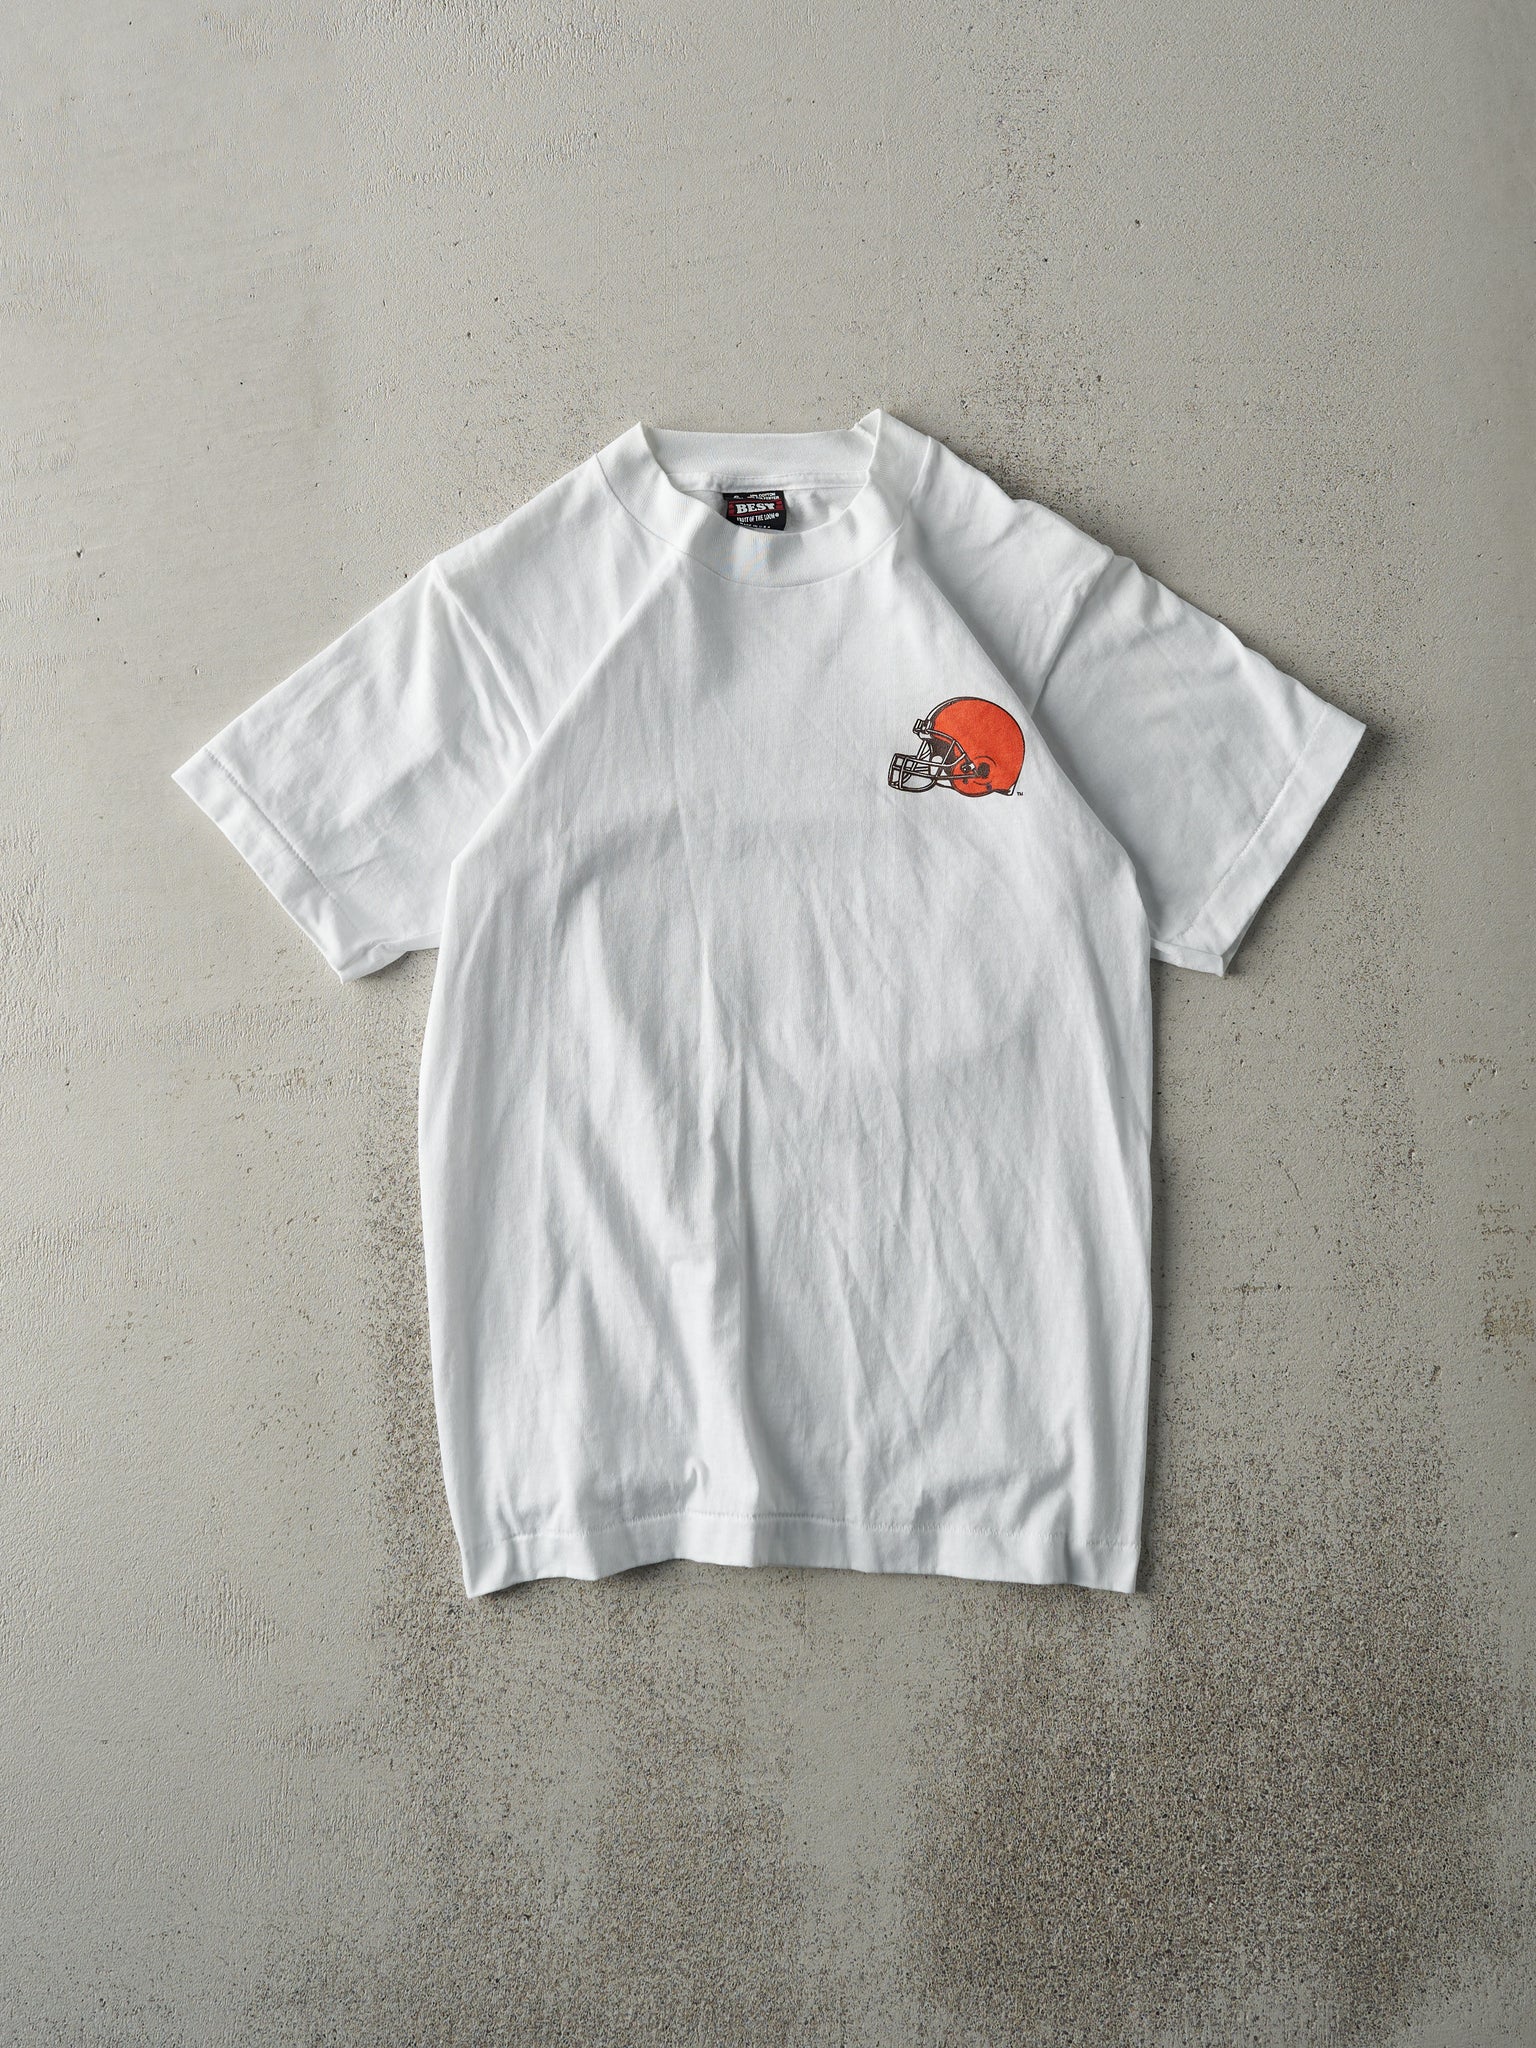 Vintage 90s White Cleveland Browns Single Stitch Tee (XS)